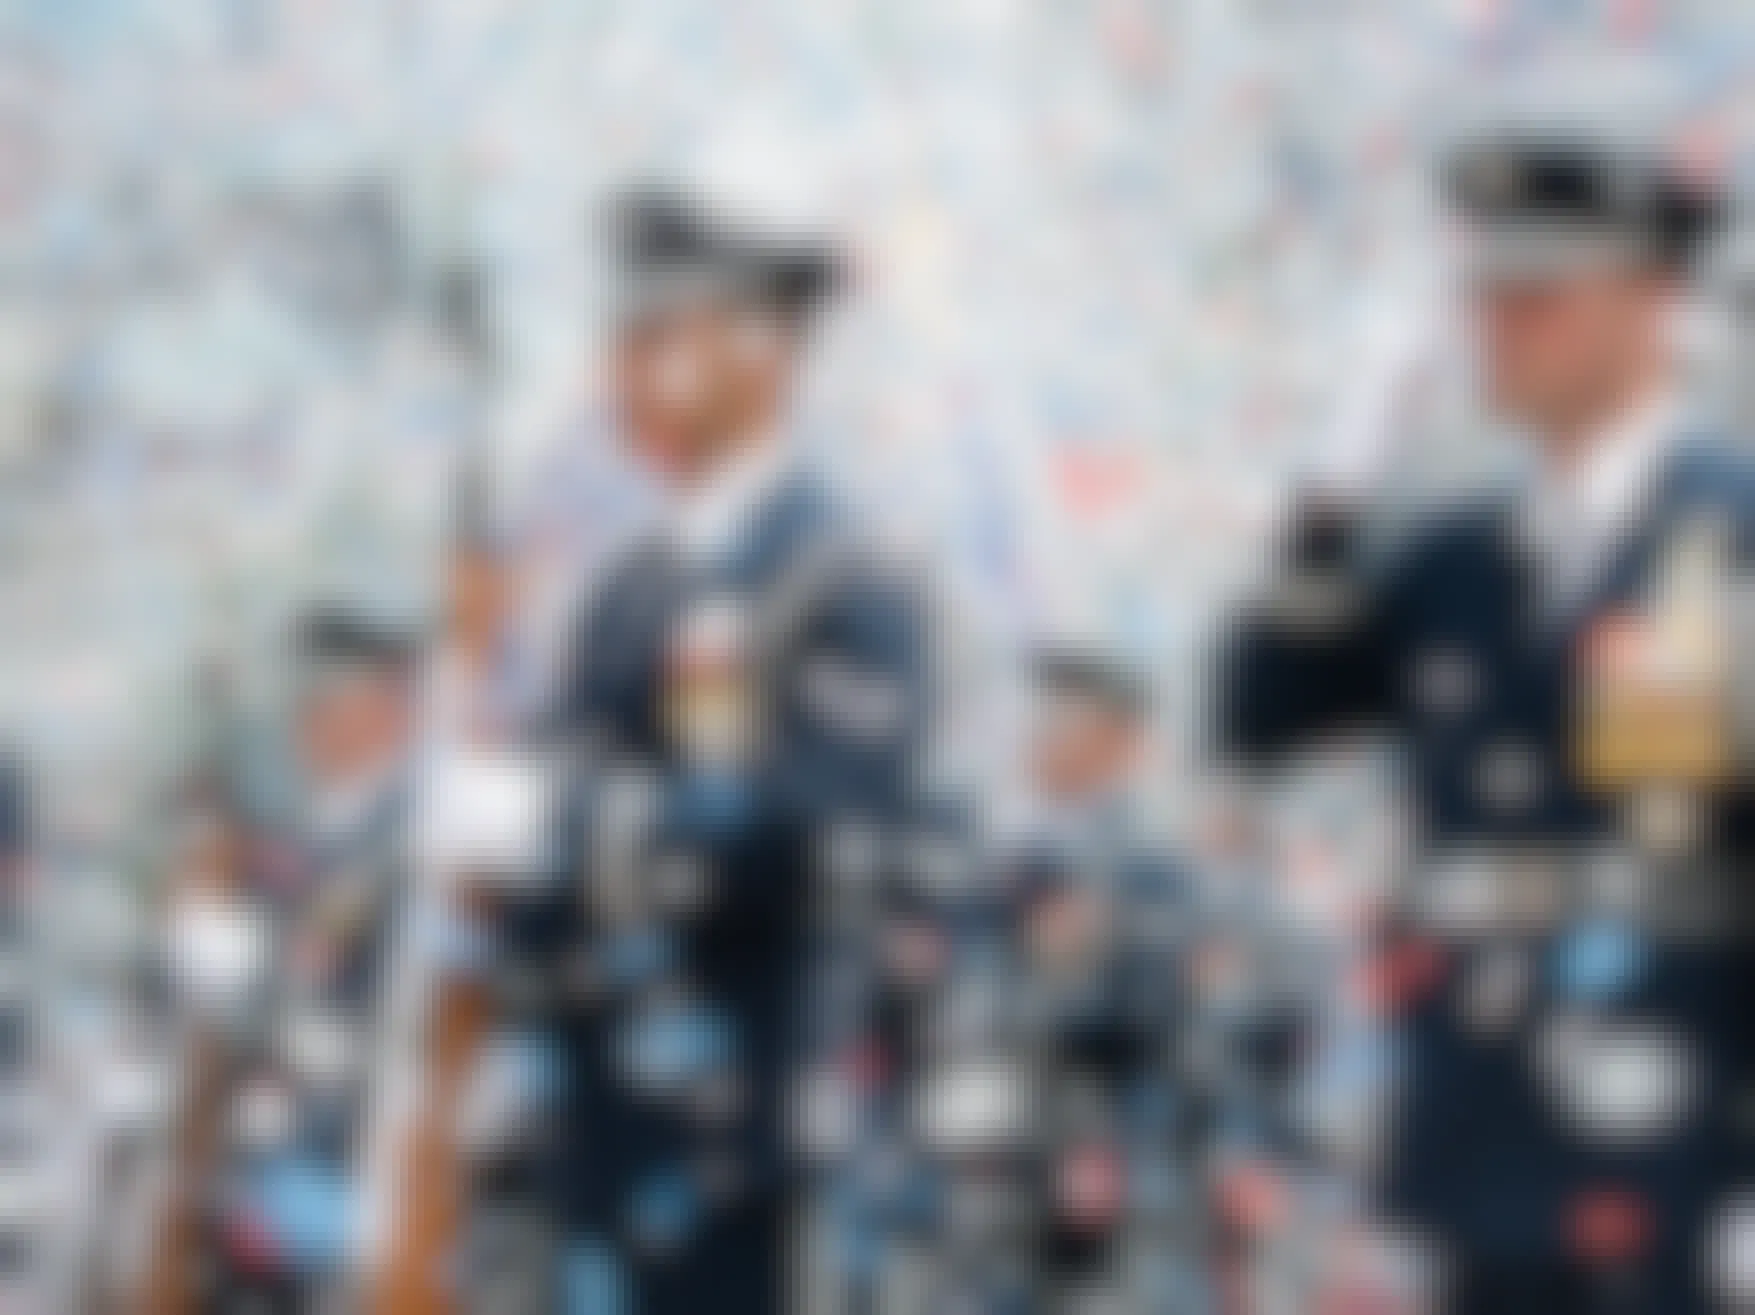 US Air Force soldiers dressed in uniform with confetti flying around them